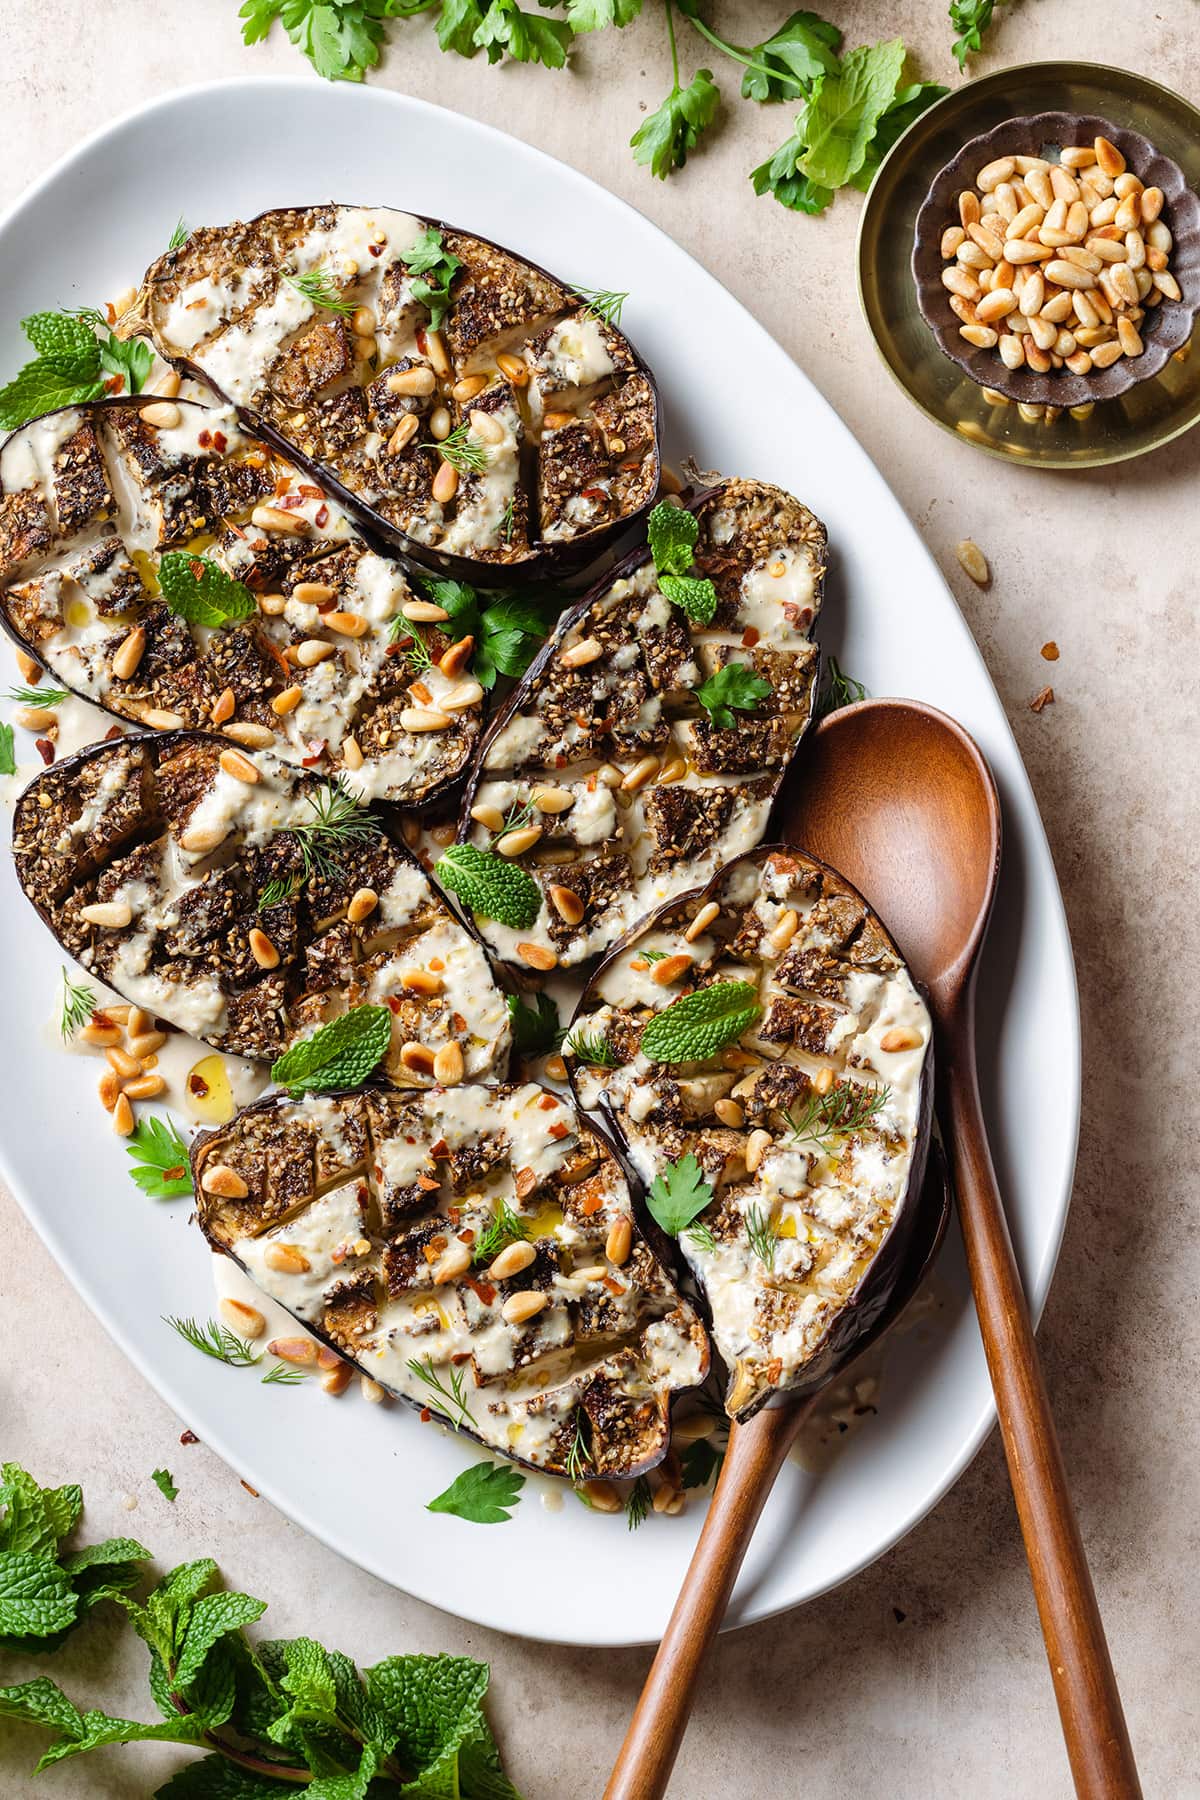 Halved roasted eggplant with spices, tahini sauce, herbs, and pine nuts on a large white plate with wooden serving spoons on the right.